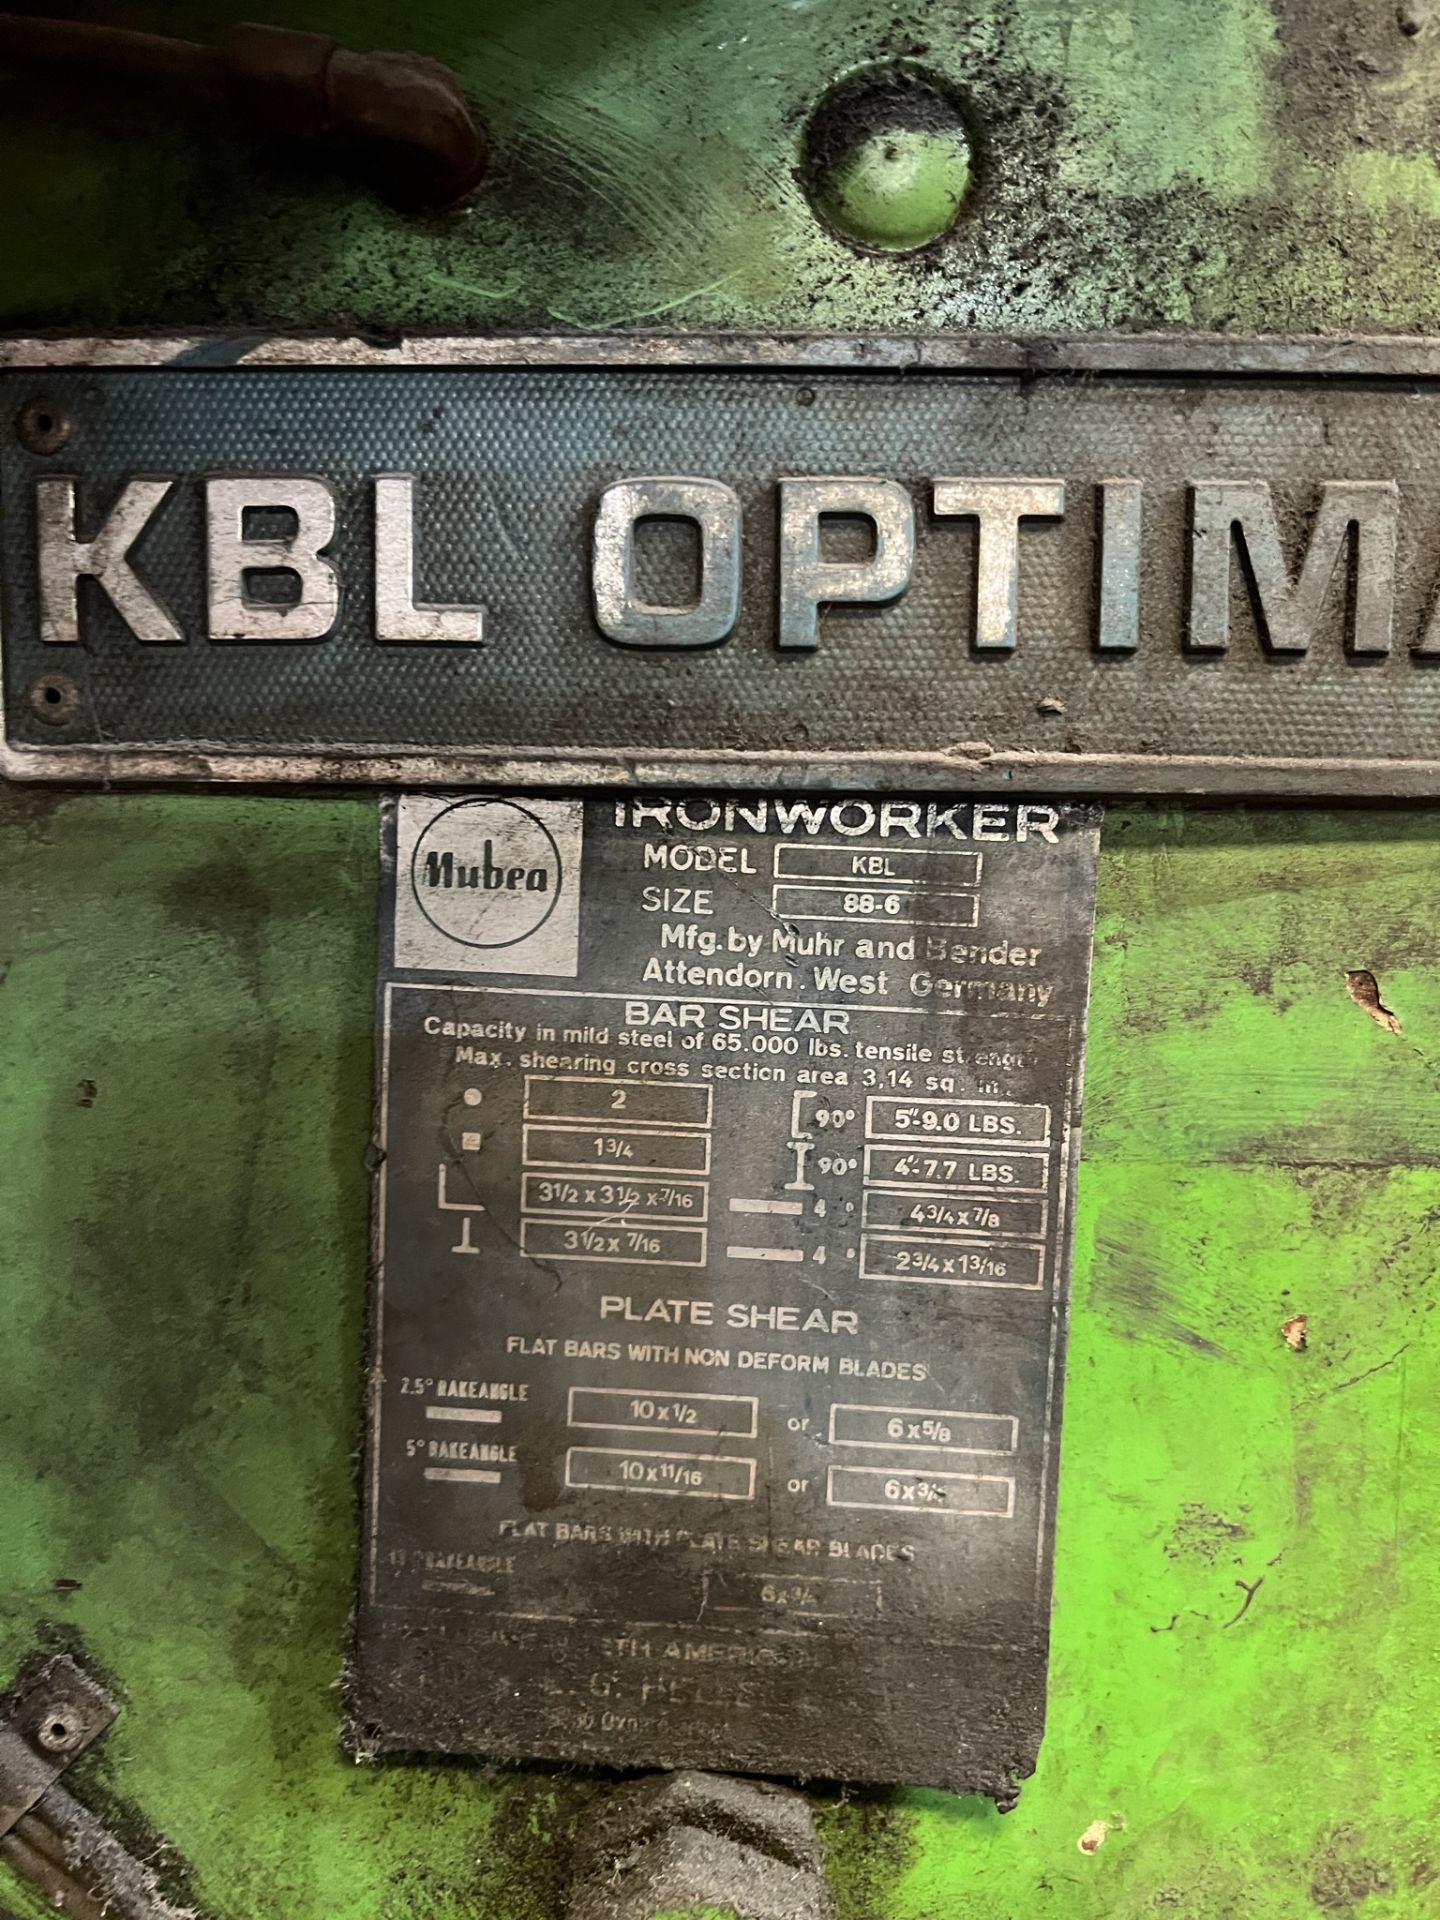 MUBEA IRONWORKER, MODEL KBL 88-6, 88-TON CAPACITY, S/N 135A/42918F/27 - Image 15 of 15